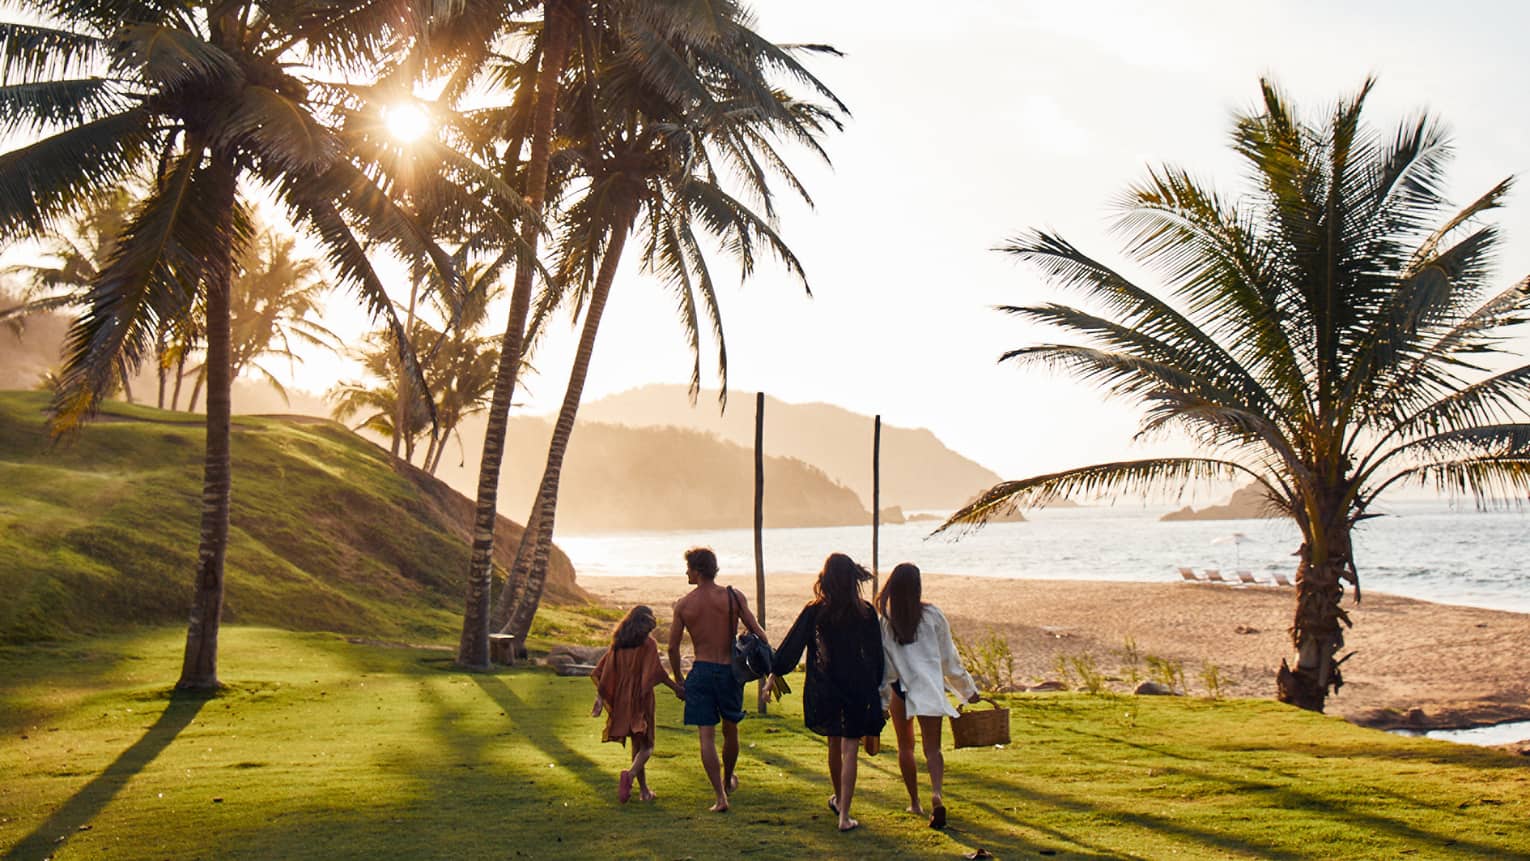 A family walking on well-cut grass with palm trees around.